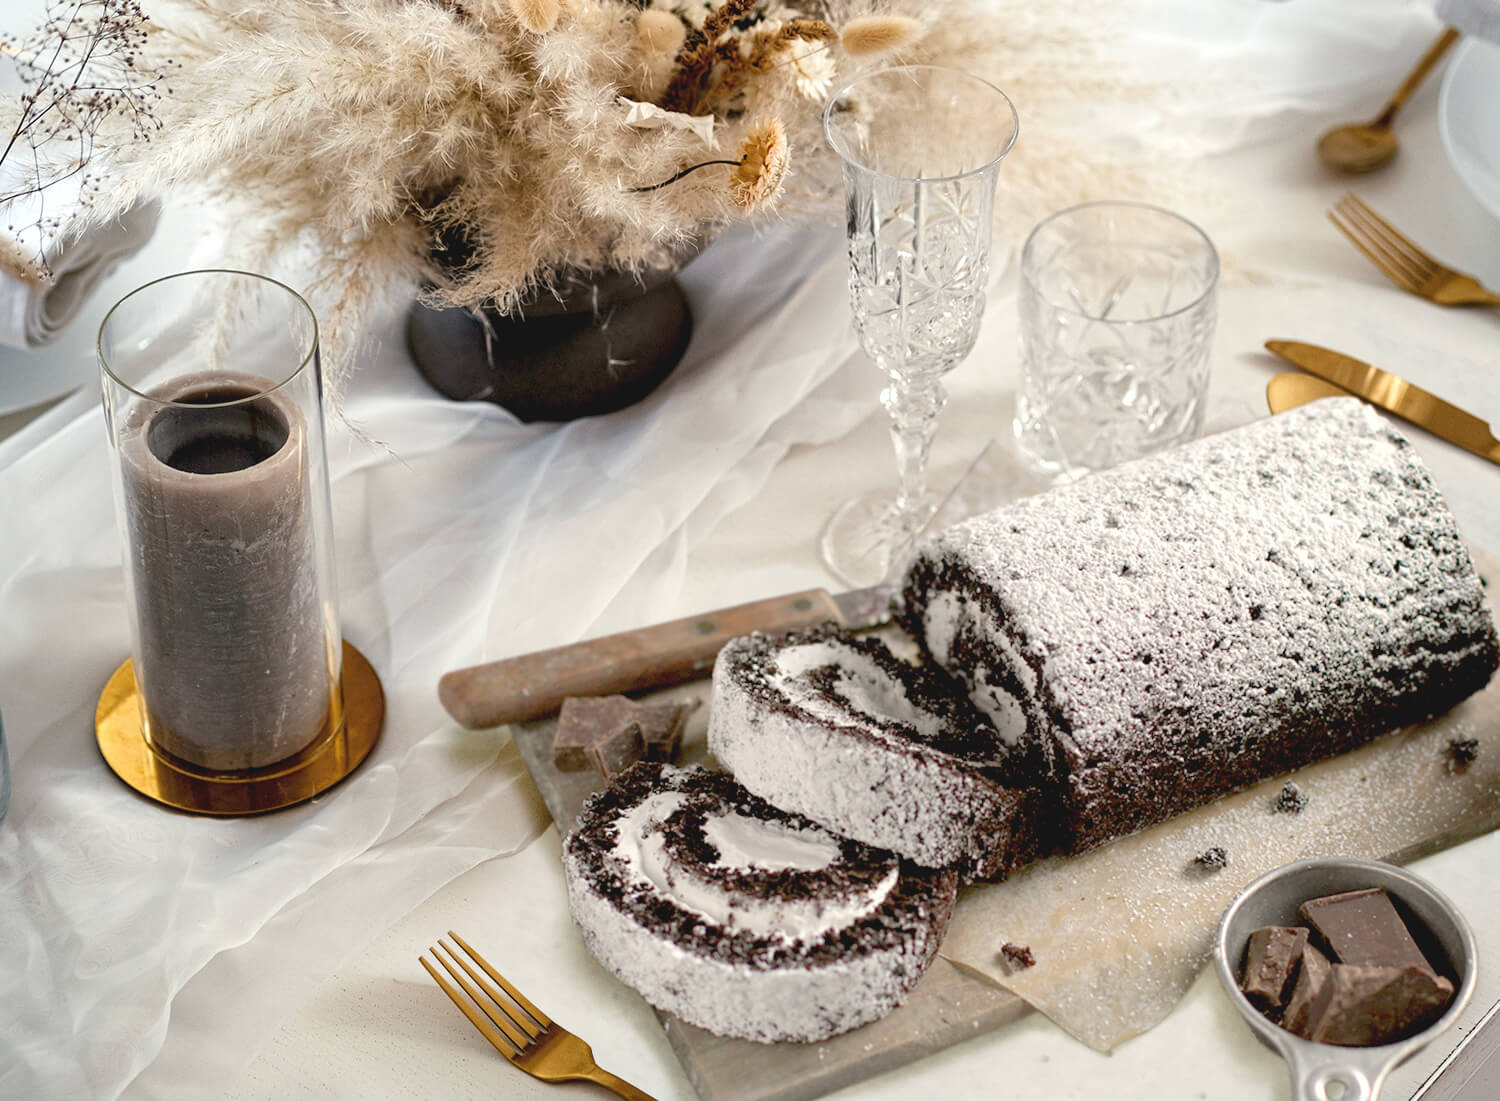 Winter Party Tips - Winterscape table with chocolate cake roll